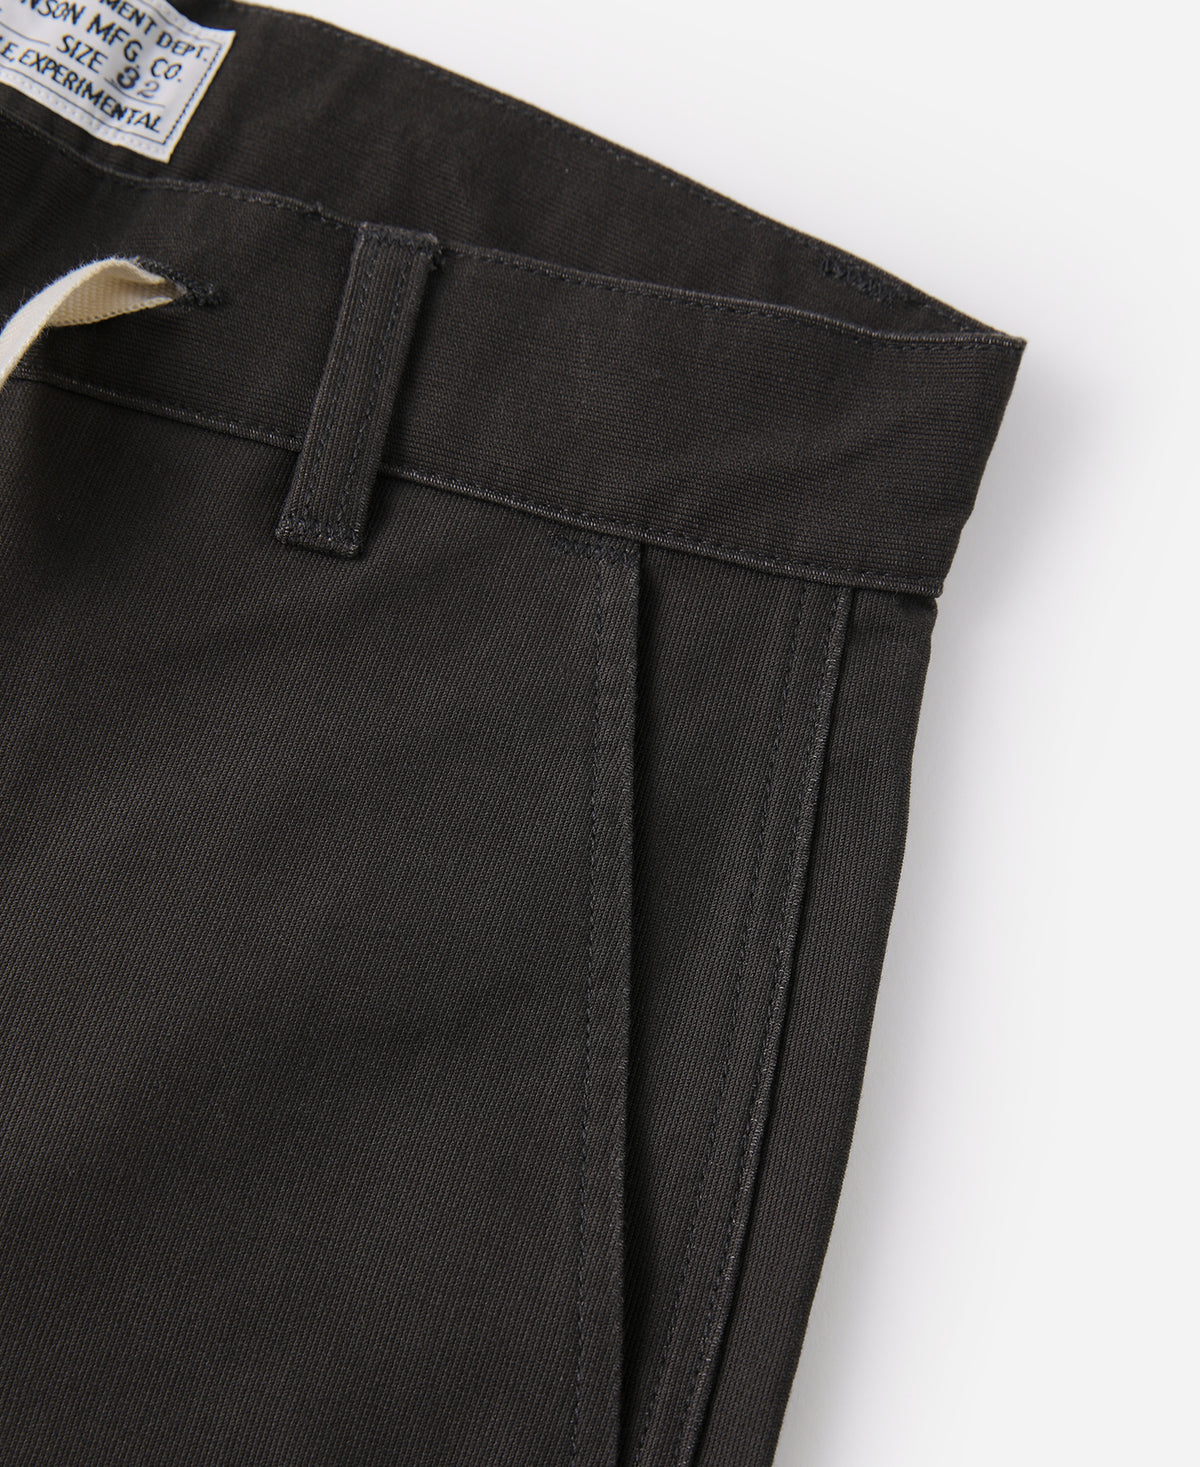 Experimental Test Sample Protective Cover Pants - Dark Brown